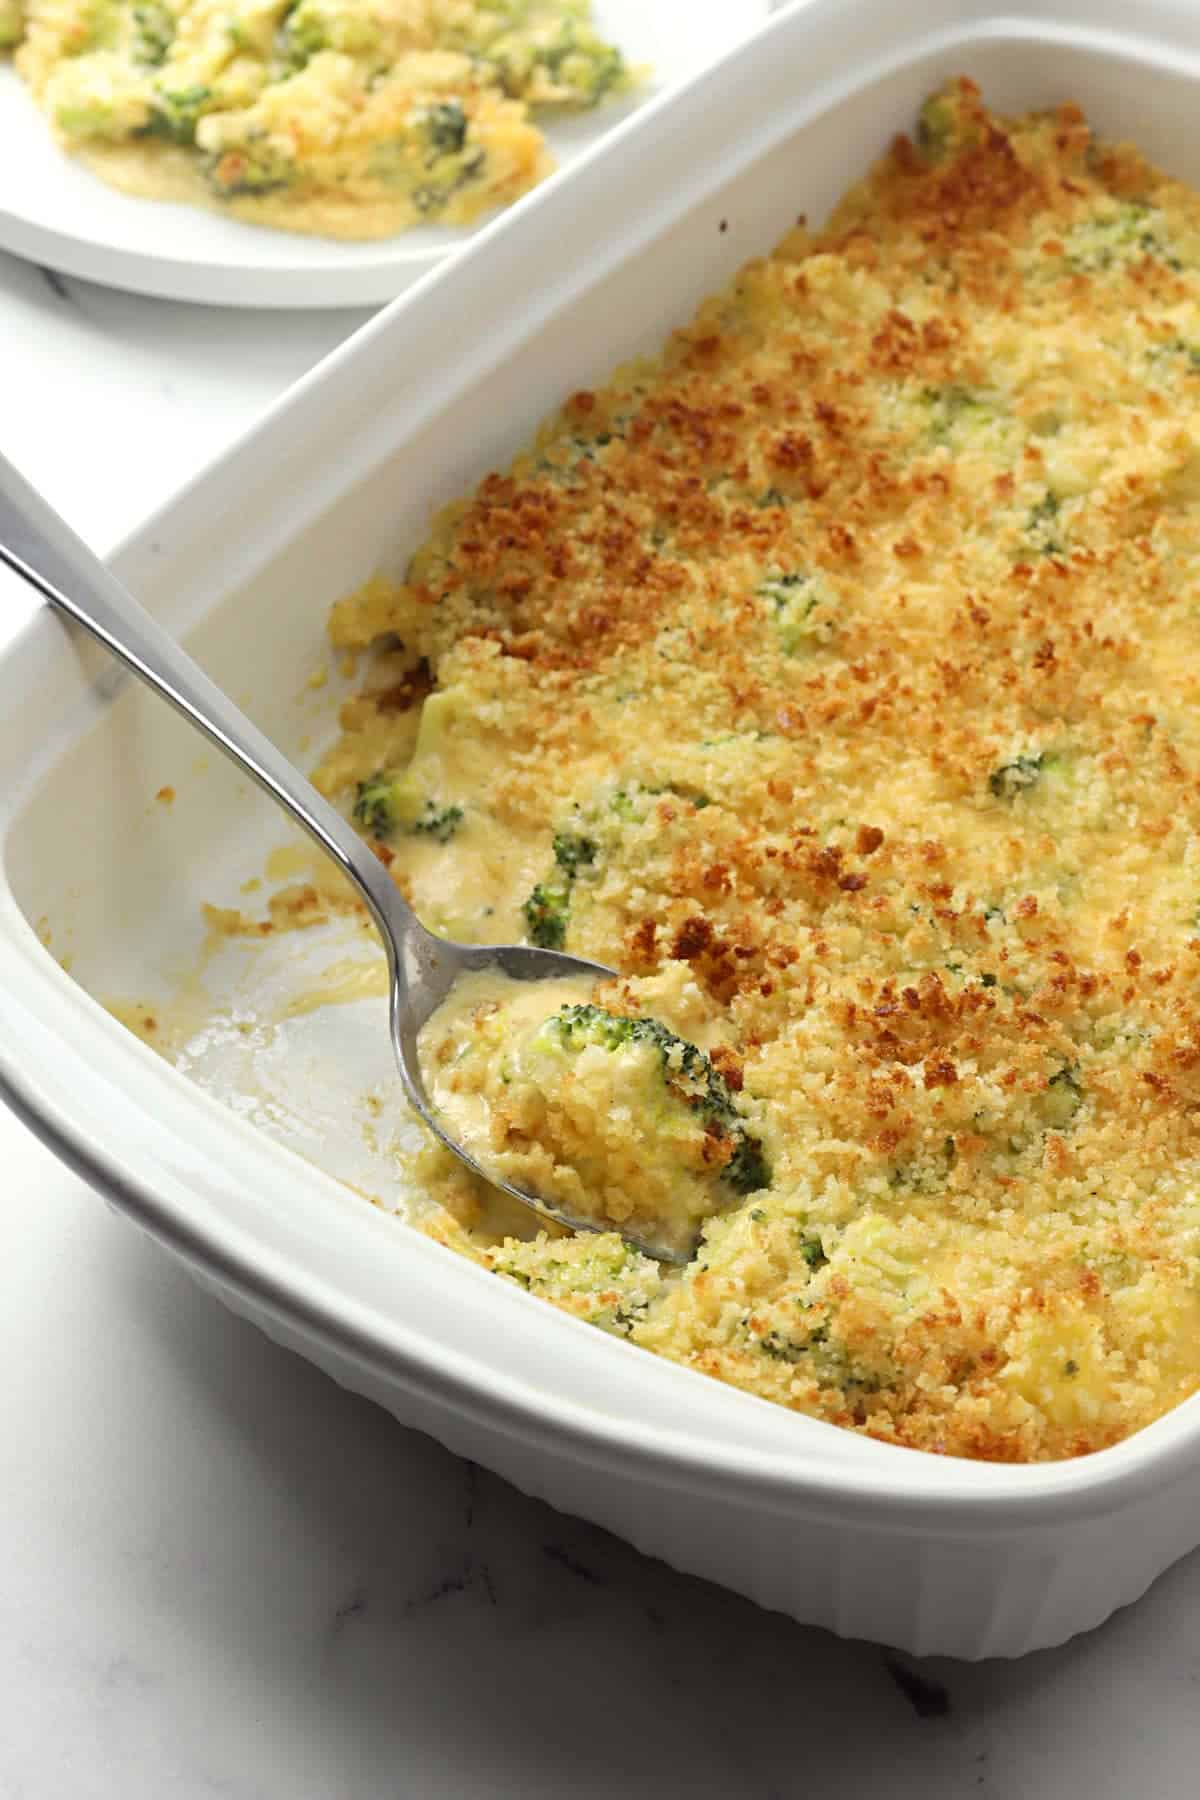 Broccoli and cheese topped with panko crust in a white casserole dish.